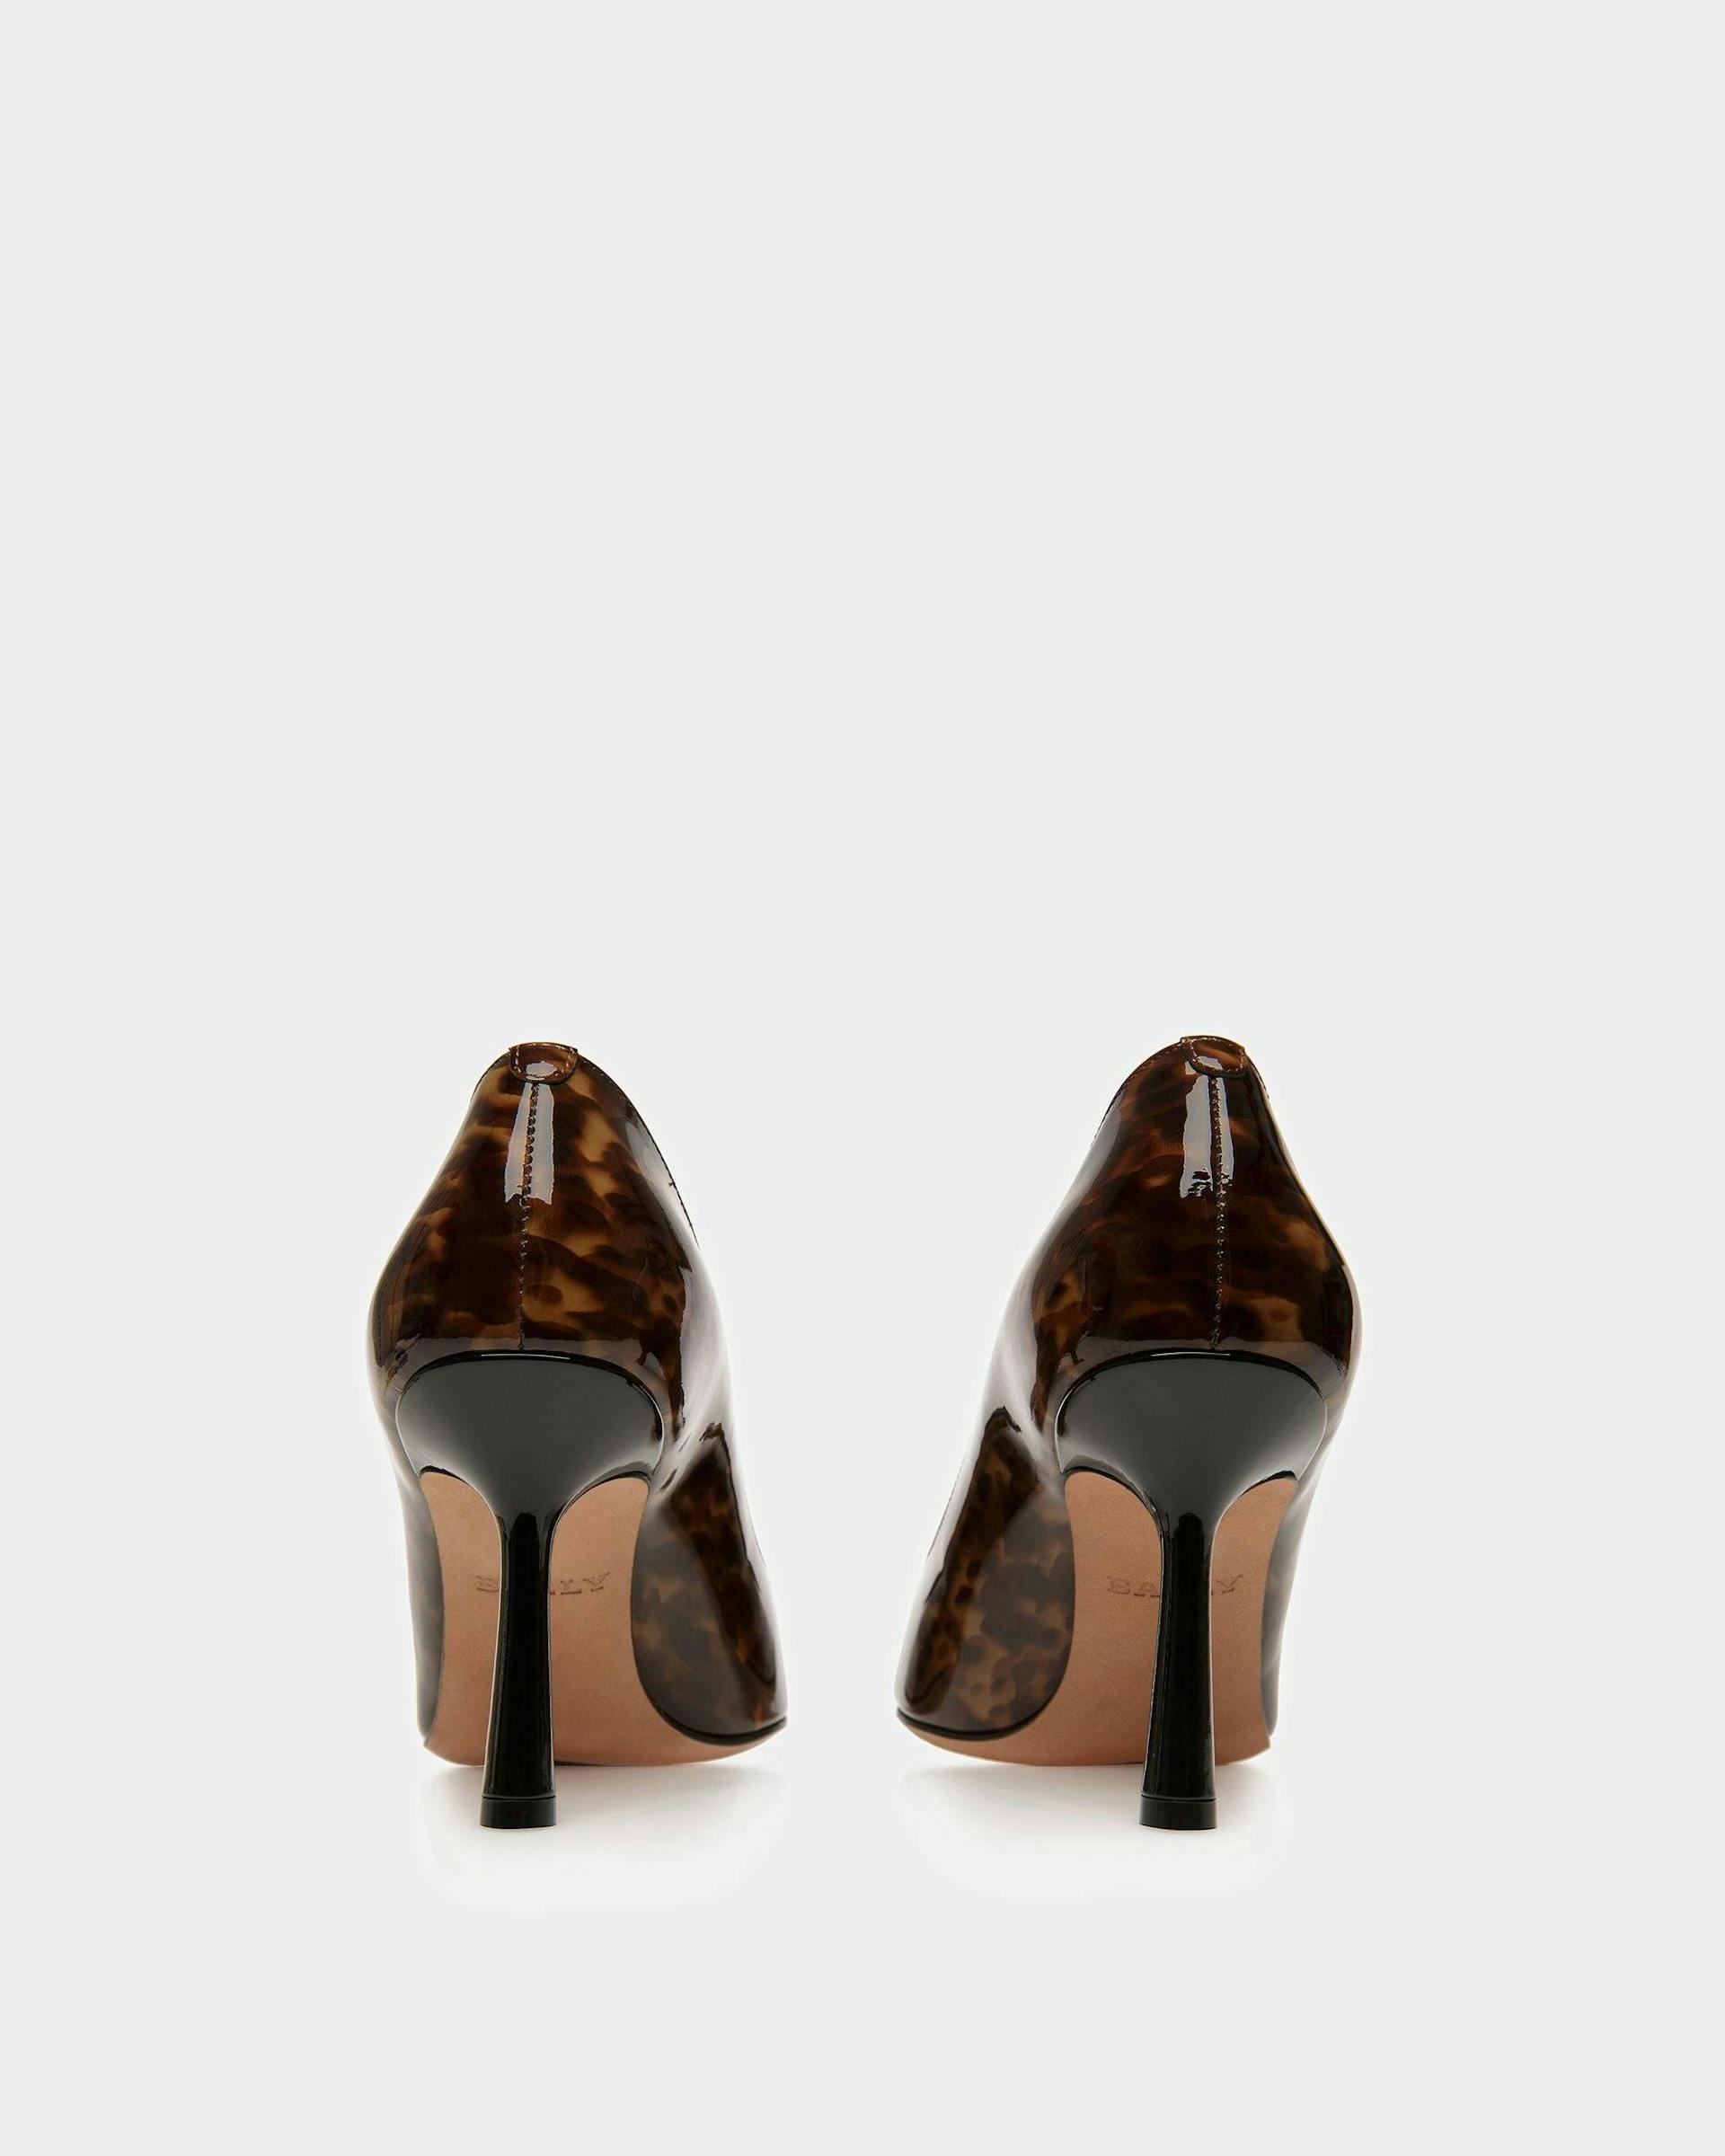 Evanca Leather Pumps In Black And Brown - Women's - Bally - 04